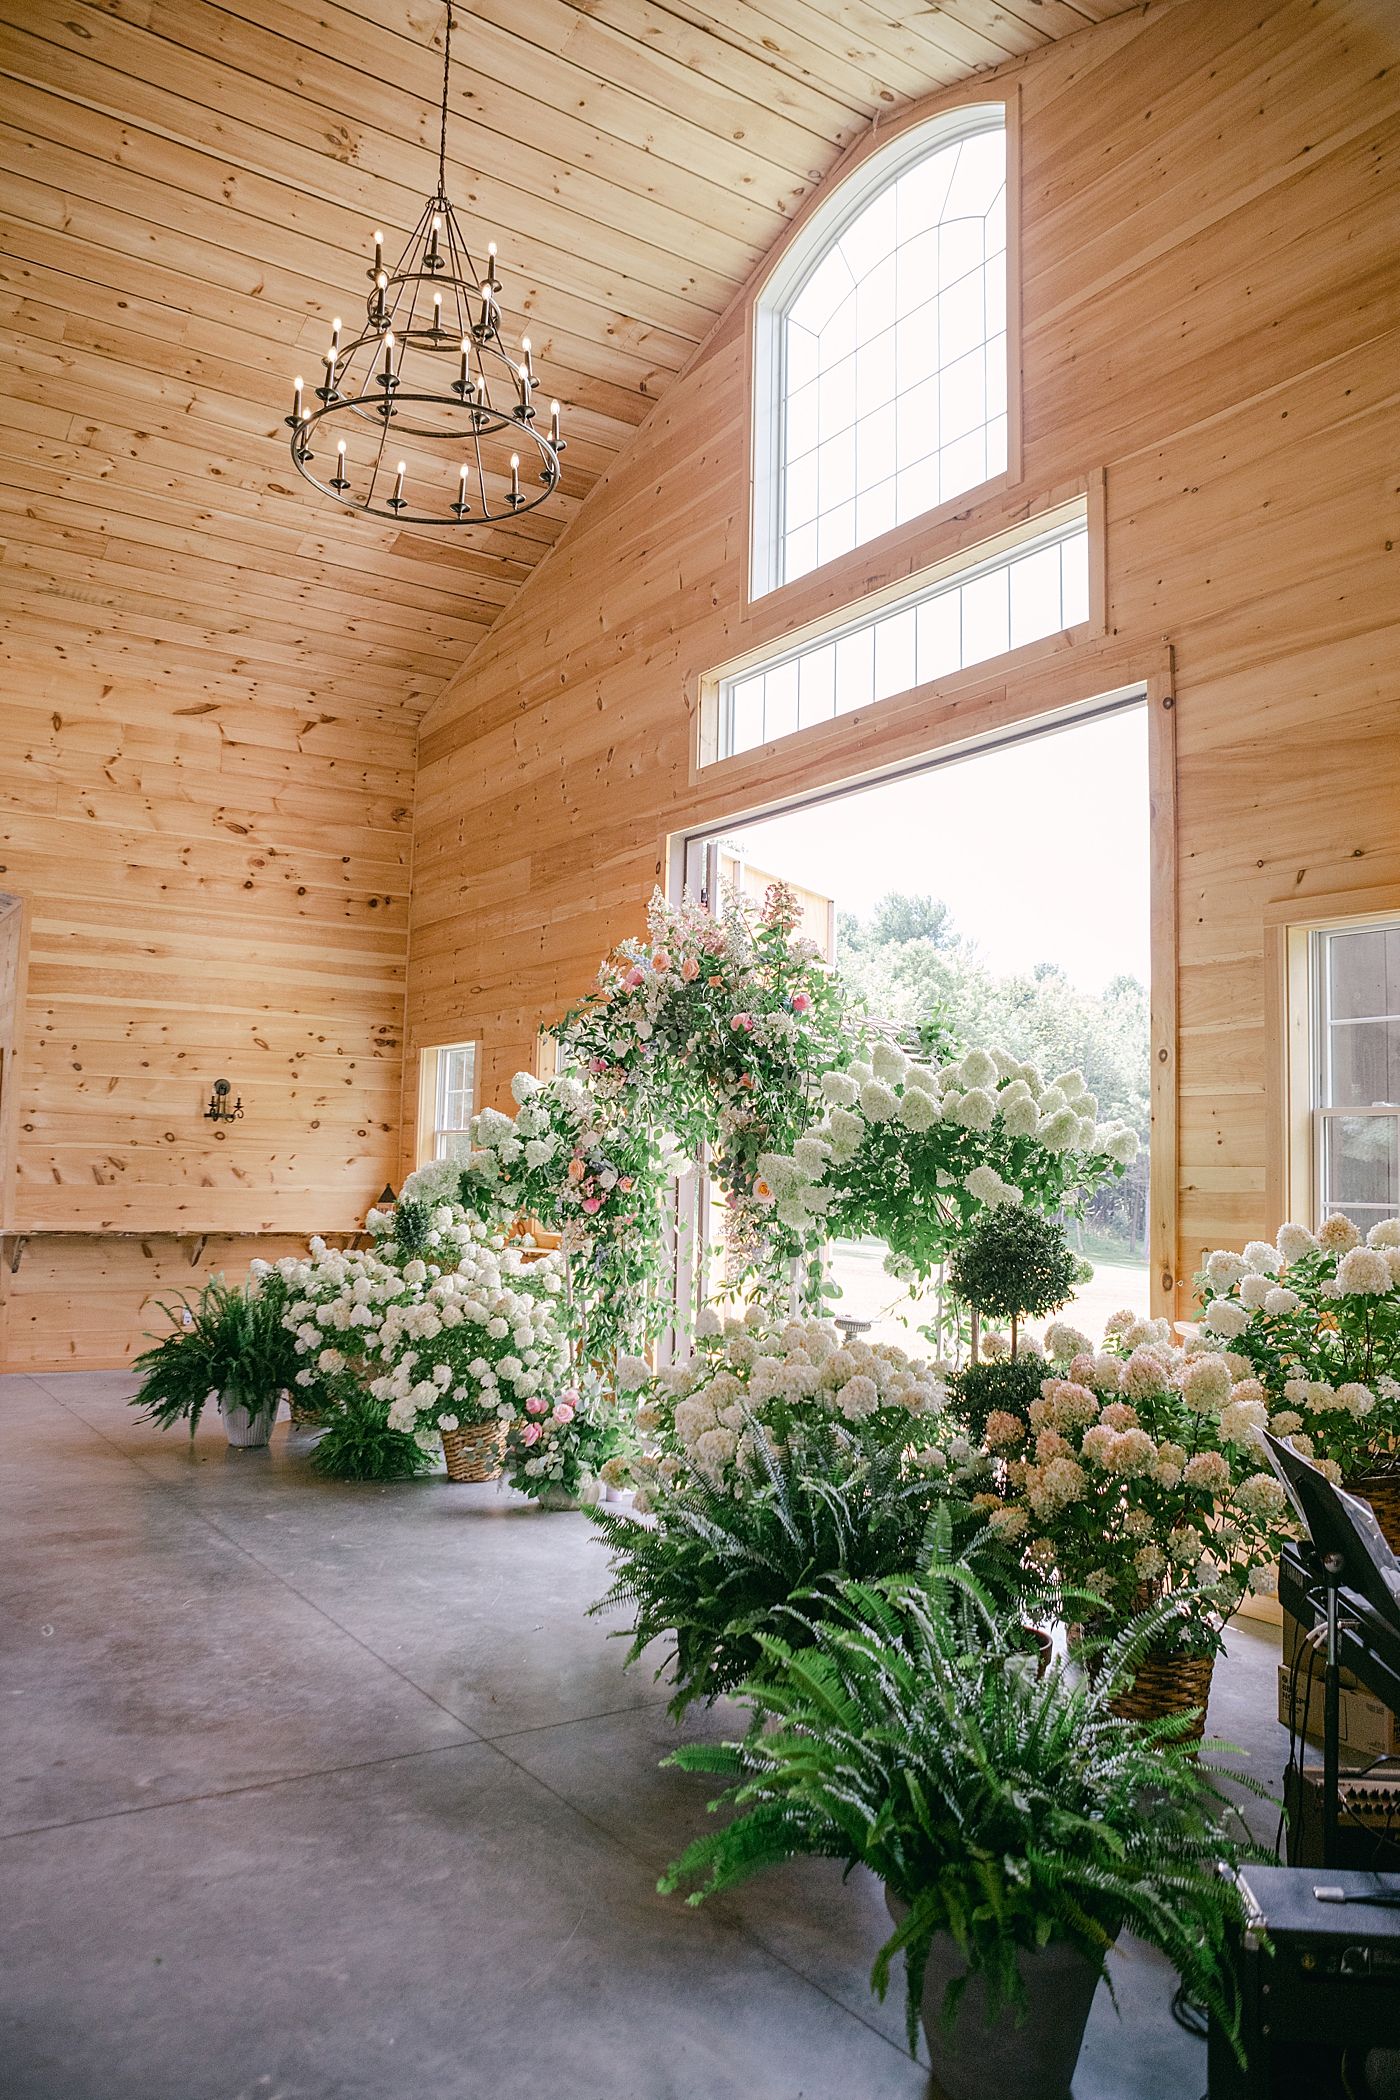 Wedding ceremony location with florals and greenery | Image by Hope Helmuth Photography